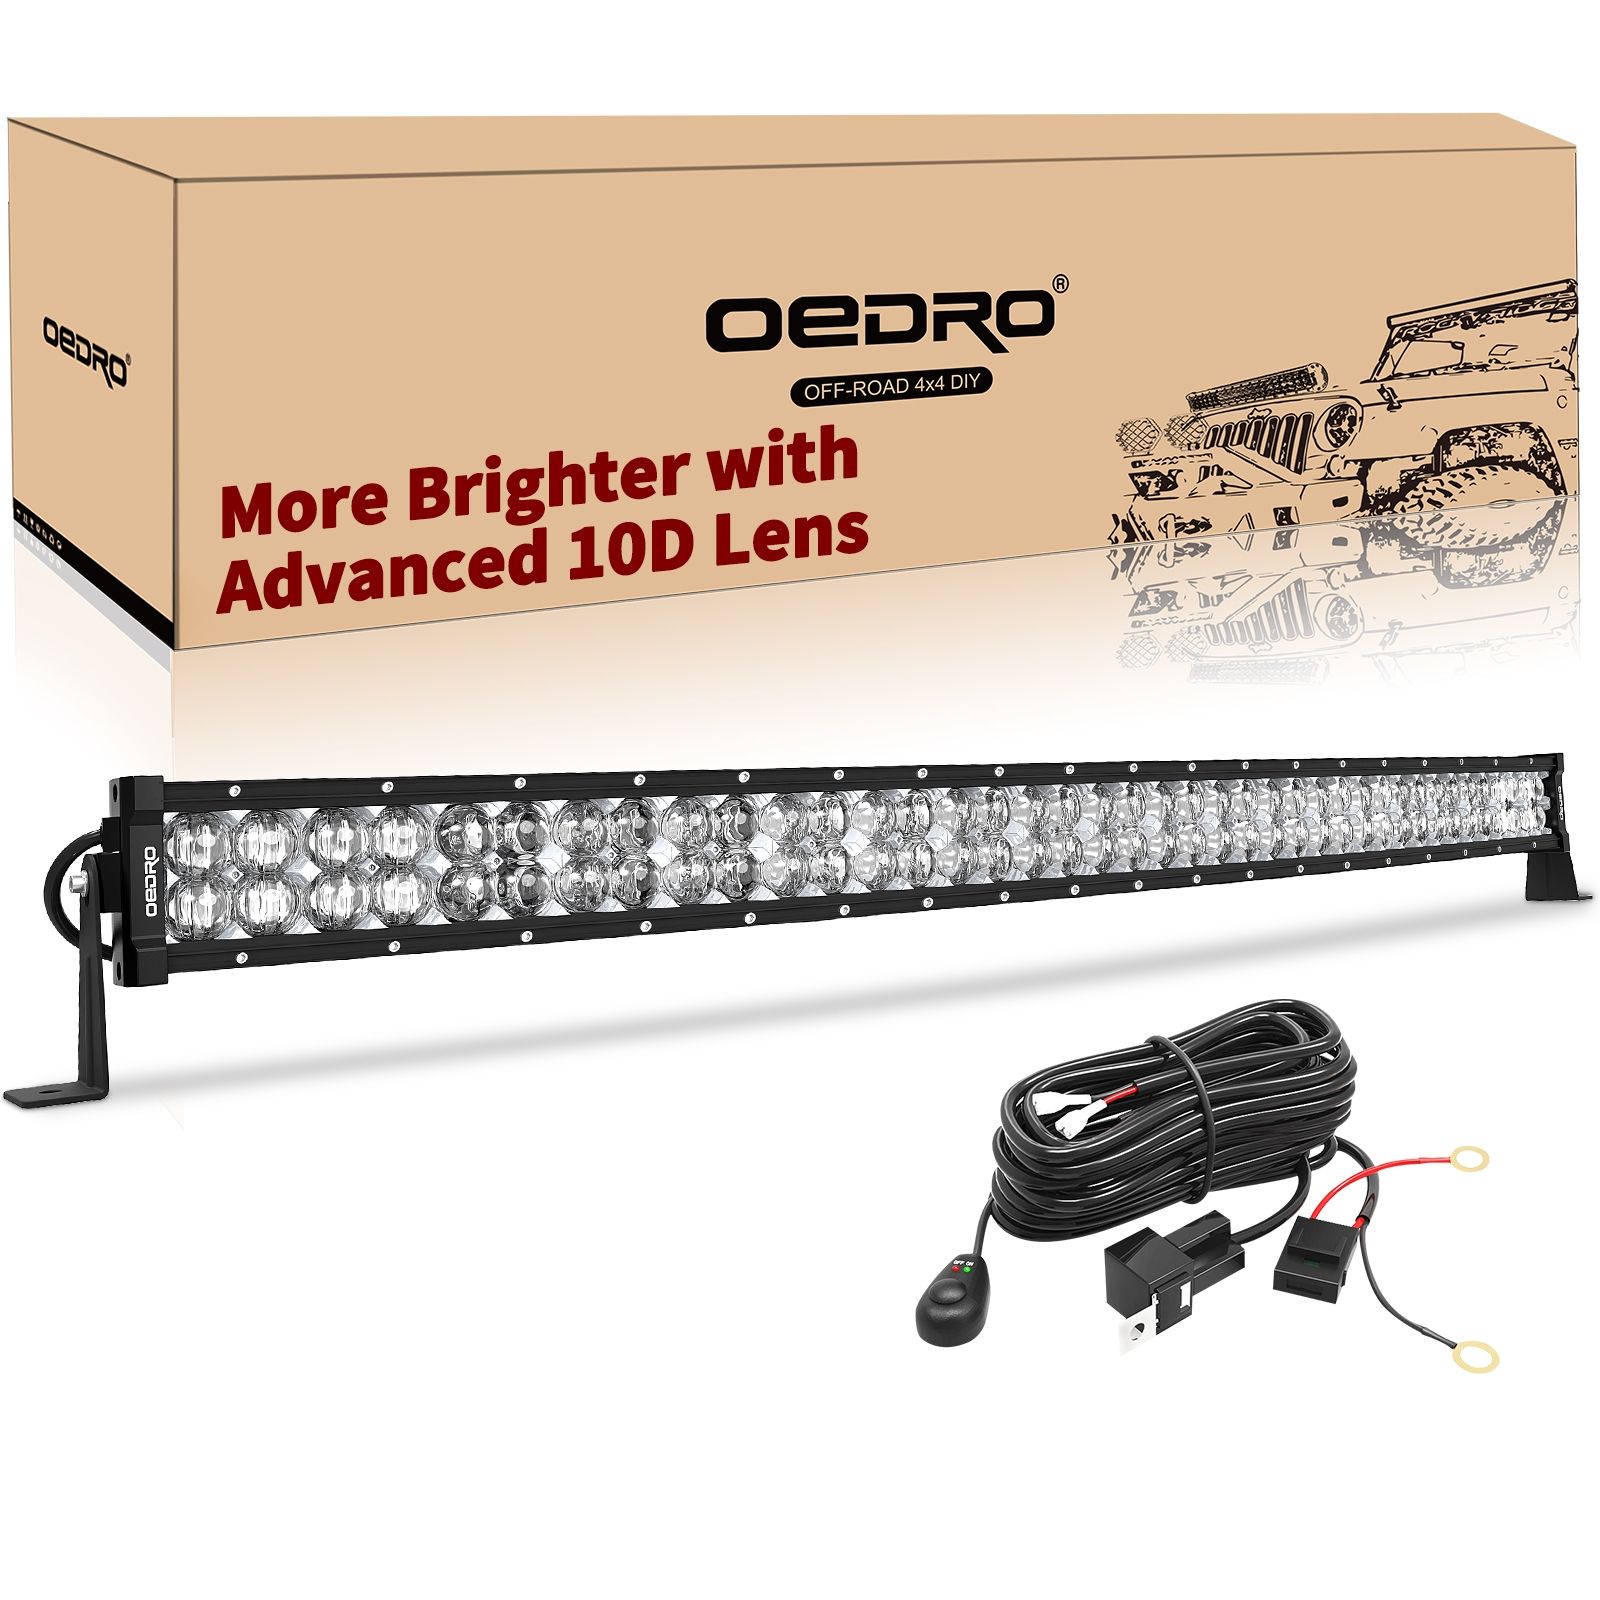 OEDRO? 42" 510W 35720LM LED Light Bar Off-Road Light With Wiring Harness